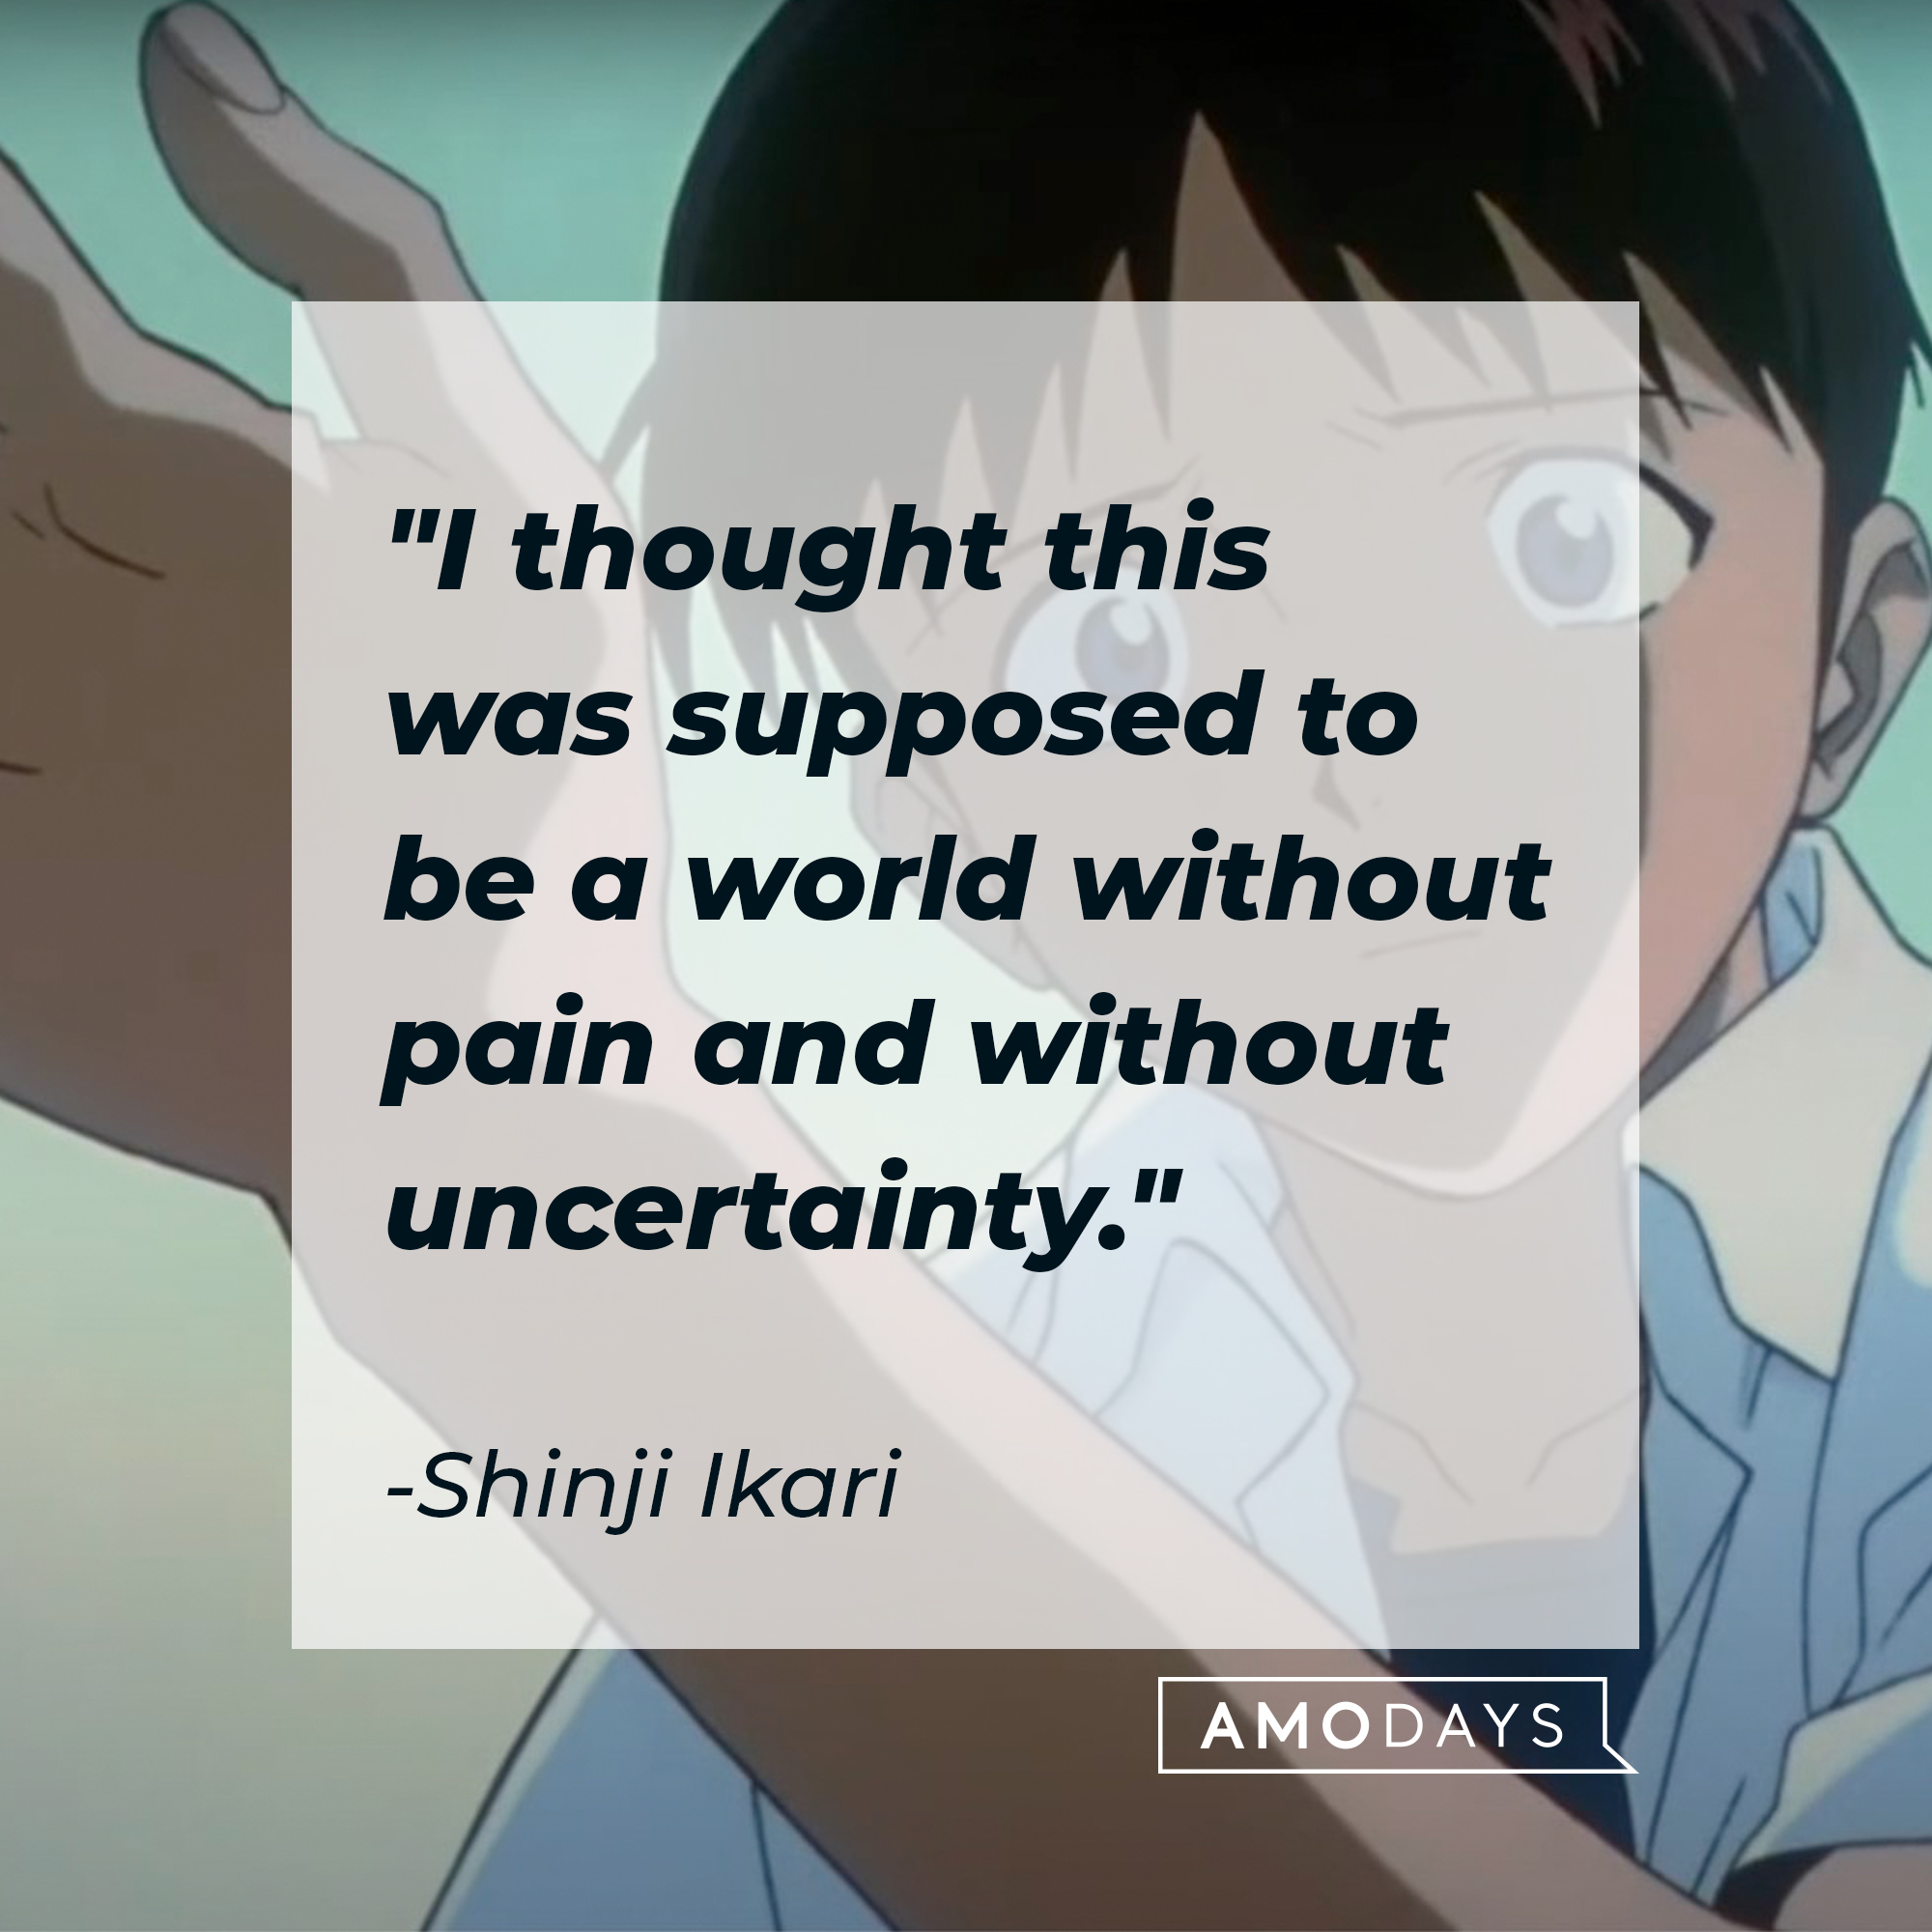 Shinji Ikari's quote: "I thought this was supposed to be a world without pain and without uncertainty." | Source: Facebook.com/EvangelionMovie